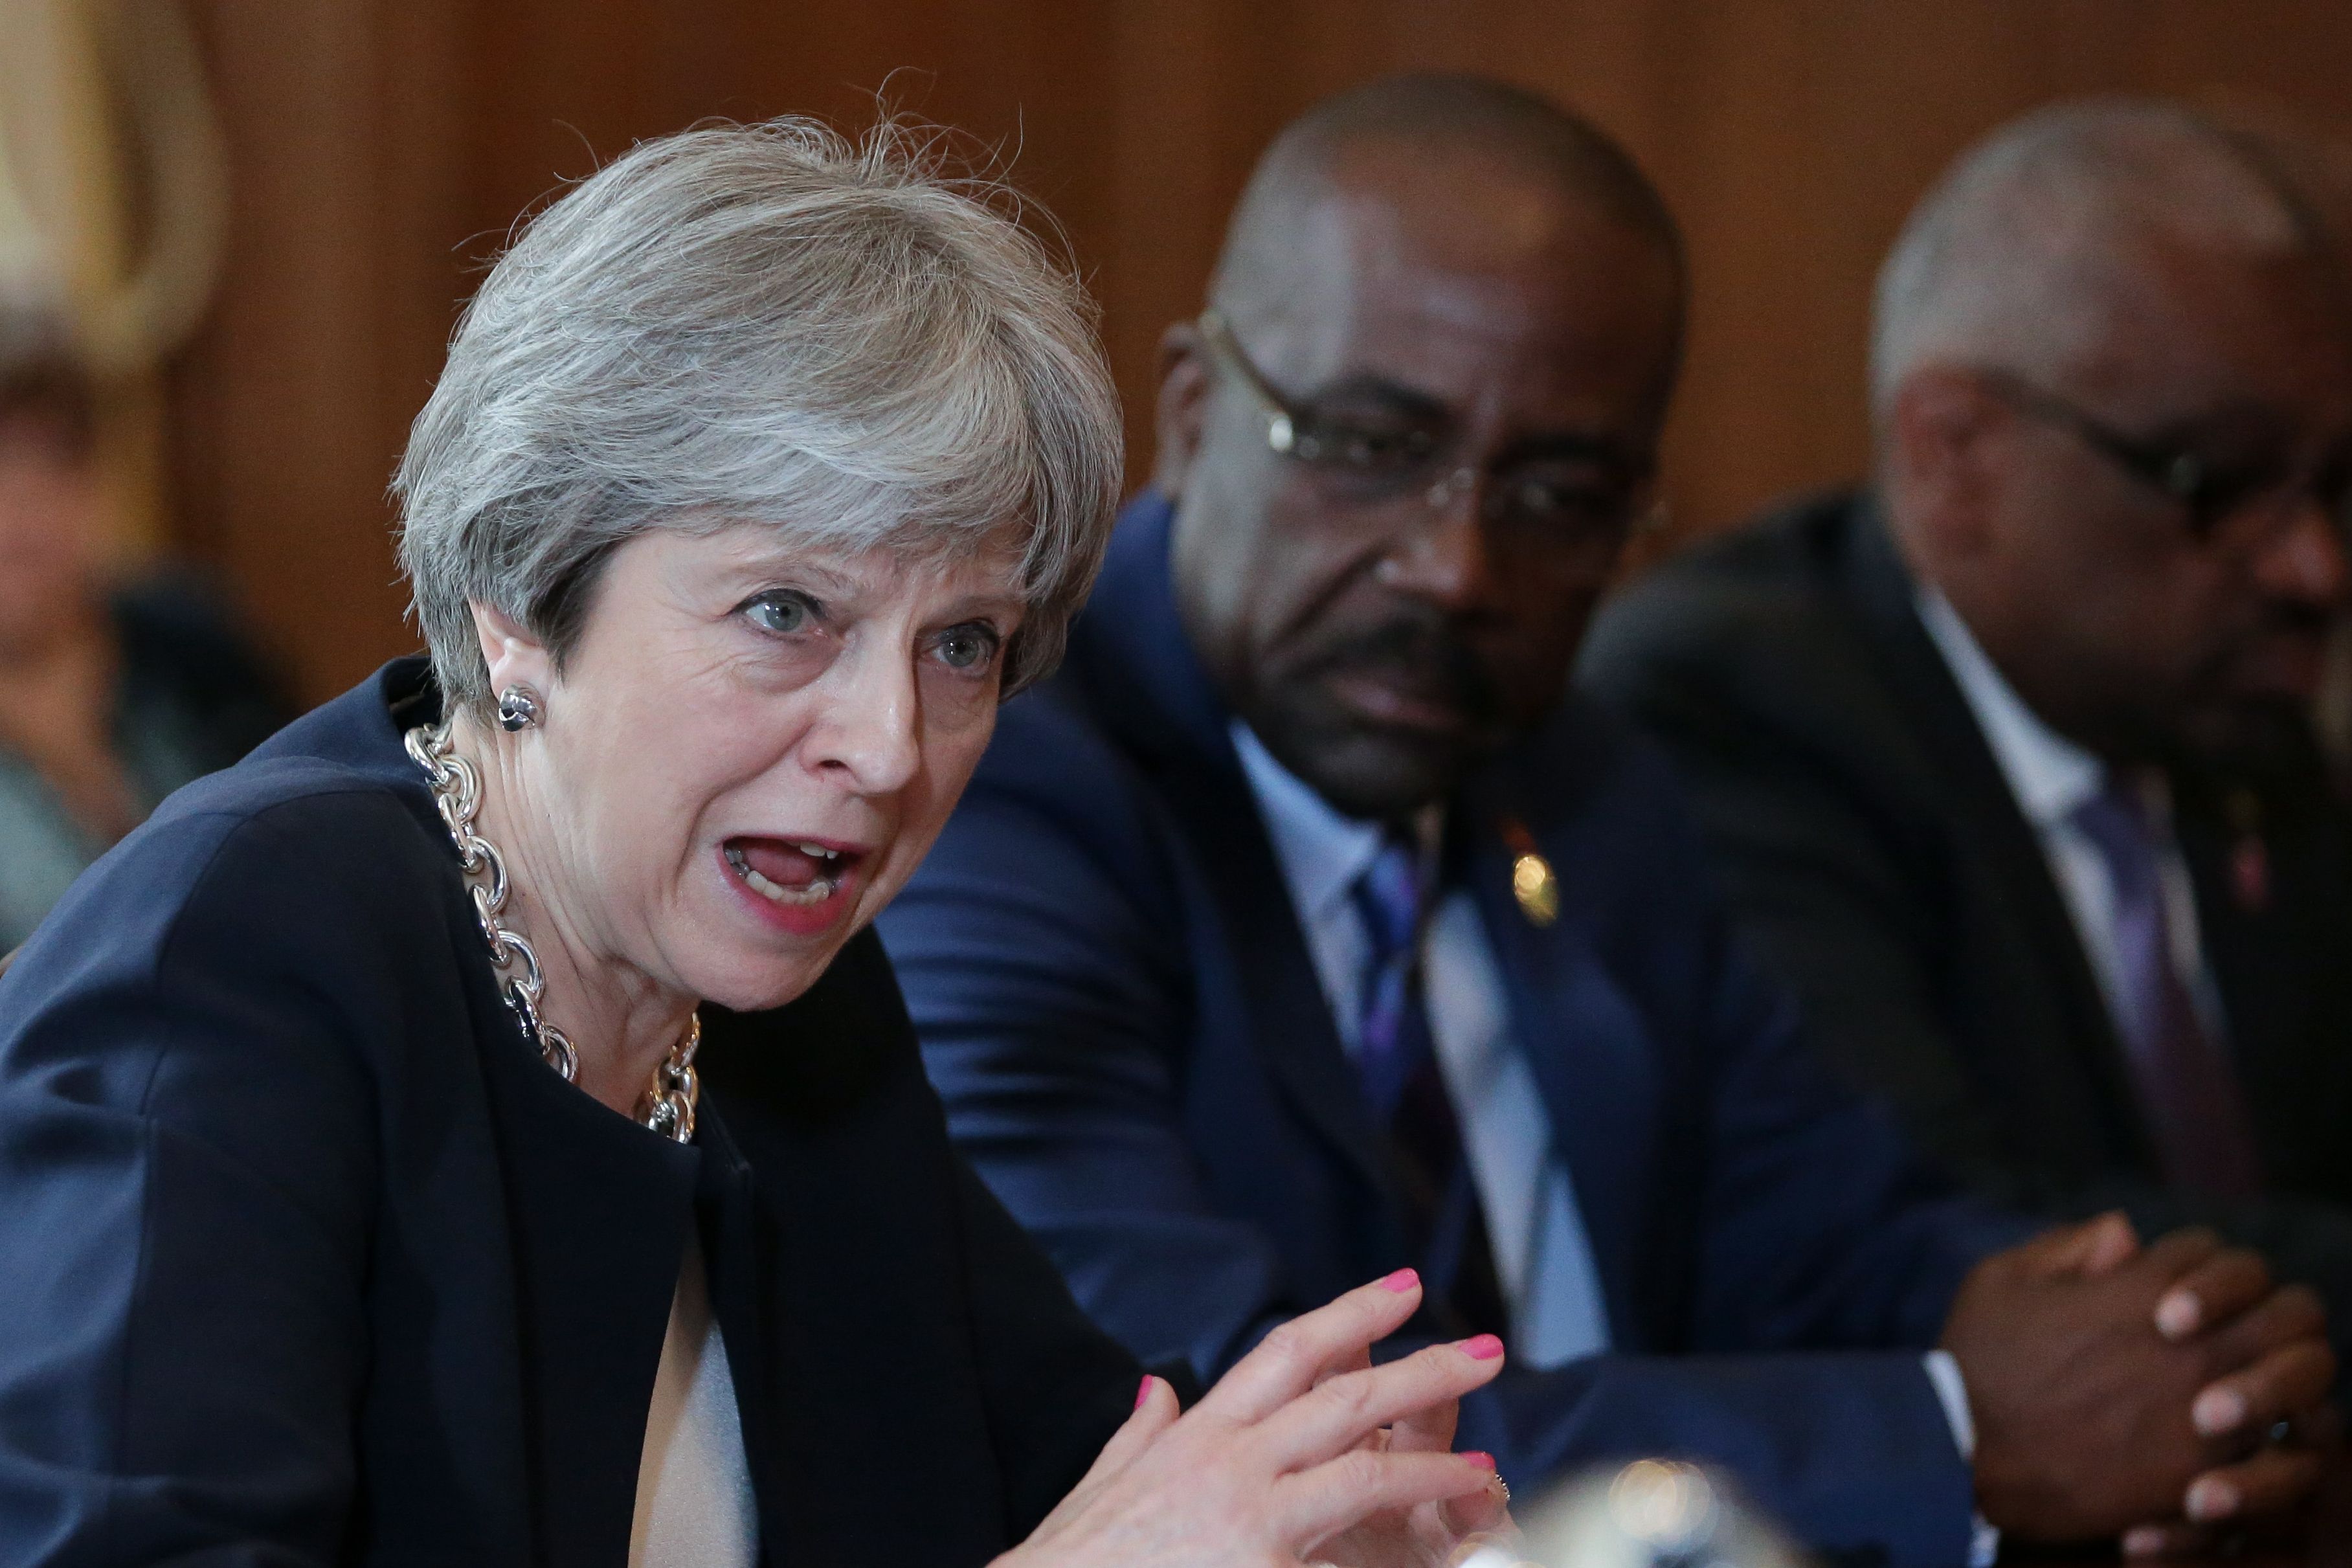 LONDON, ENGLAND - APRIL 17: Britain's Prime Minister Theresa May hosts a meeting with leaders and representatives of Caribbean countries at 10 Downing Street on April 17, 2017 in London, England. Theresa May is meeting Caribbean leaders as the Government faces severe criticism over the treatment of the "Windrush" generation of British residents. (Photo by Daniel Leal-Olivas - WPA Pool/Getty Images)